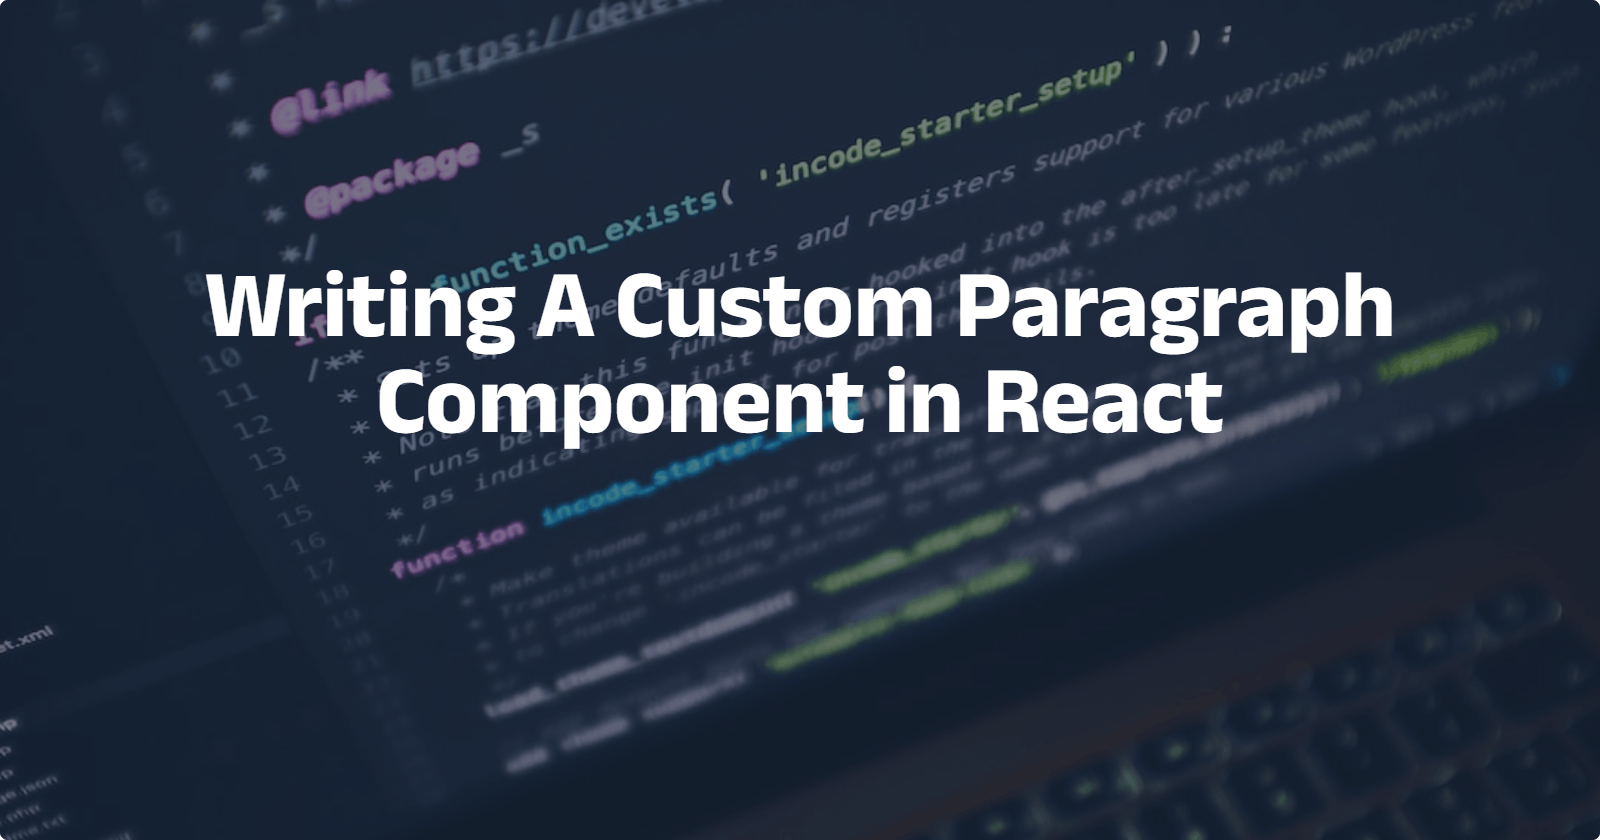 Writing A Custom Paragraph Component in React